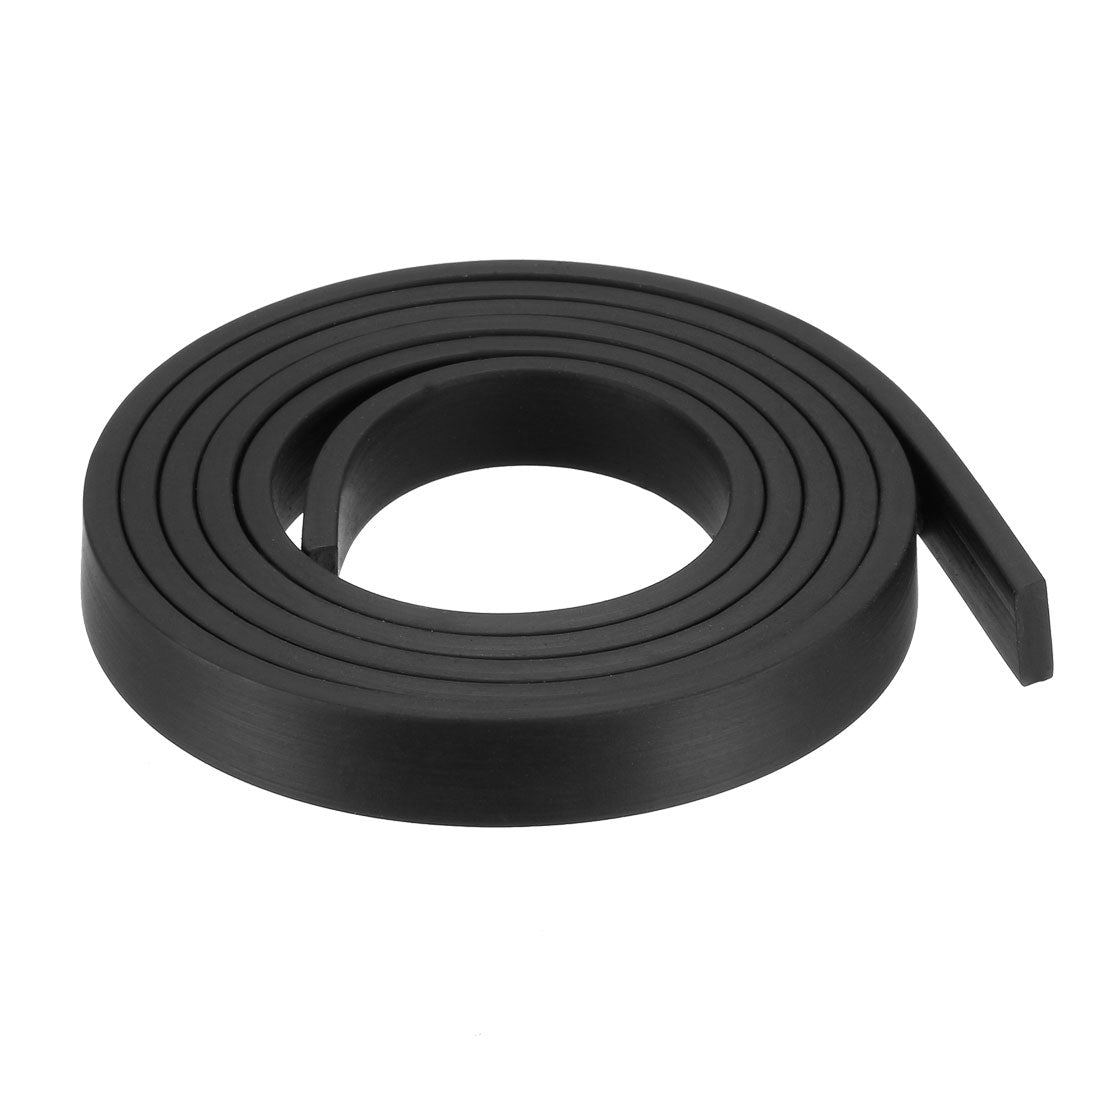 uxcell Uxcell Solid Rectangle Rubber Seal Strip 10mm Wide 3mm Thick, 1 Meter Long Black